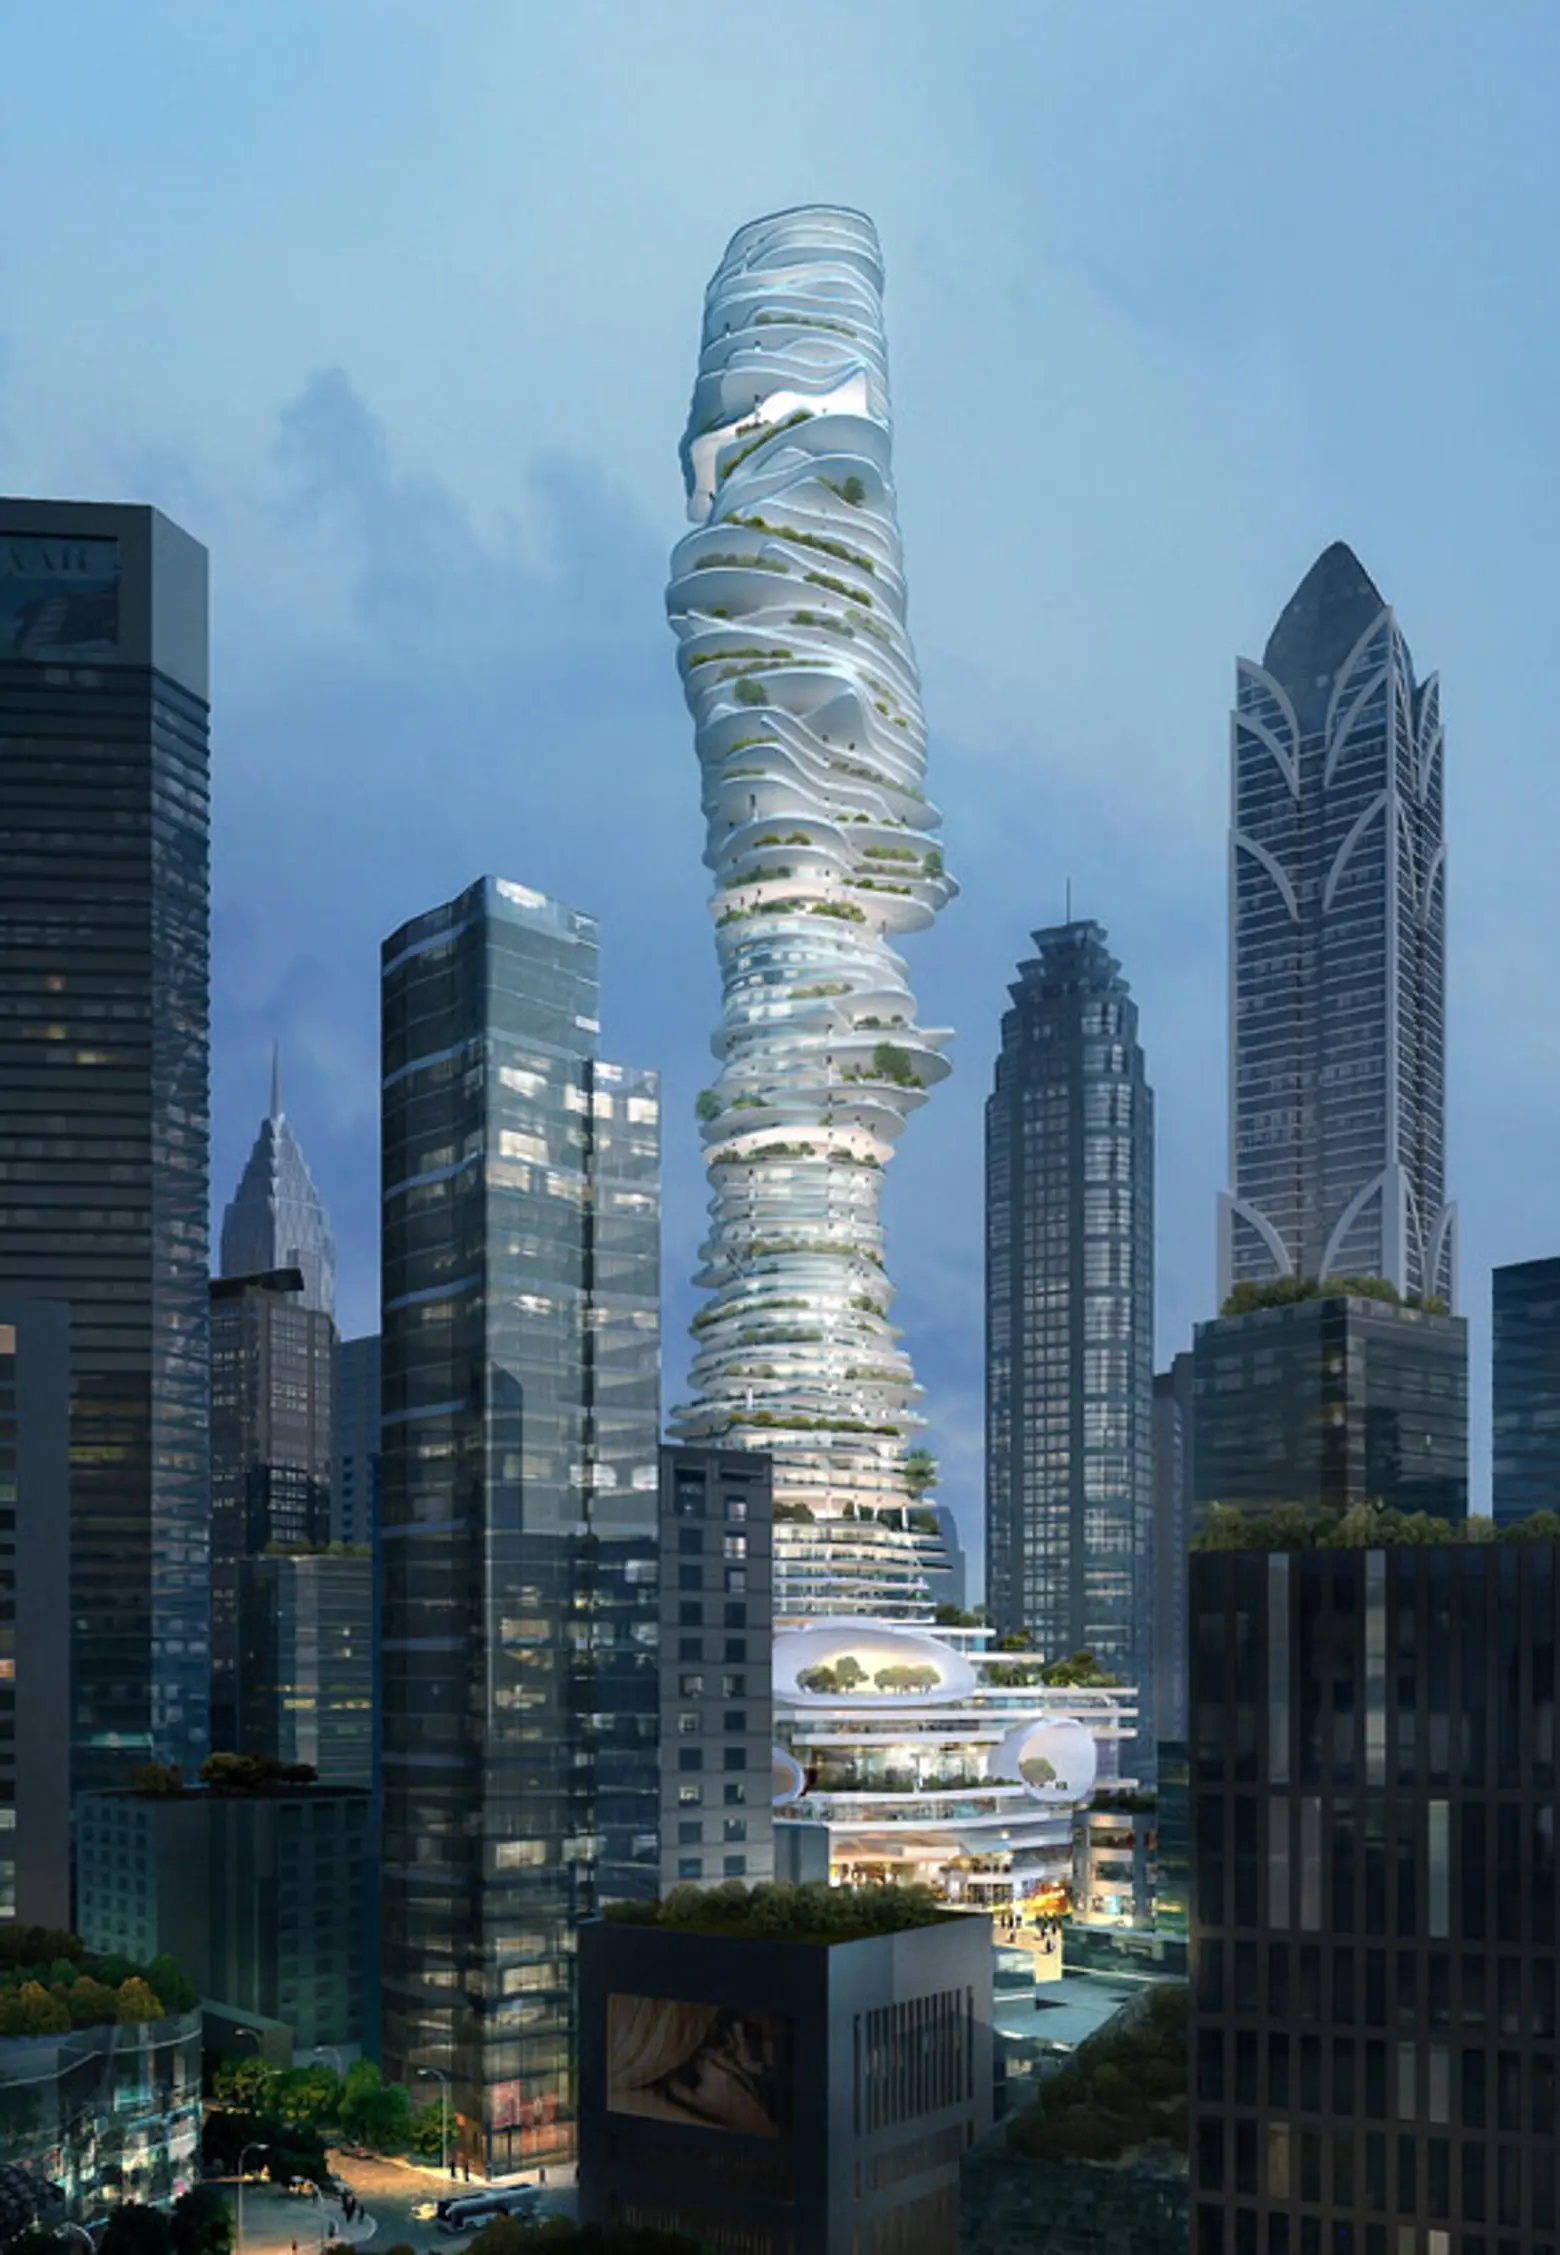 The “Urban Forest” tower by MAD Architects in Chongqing, China         